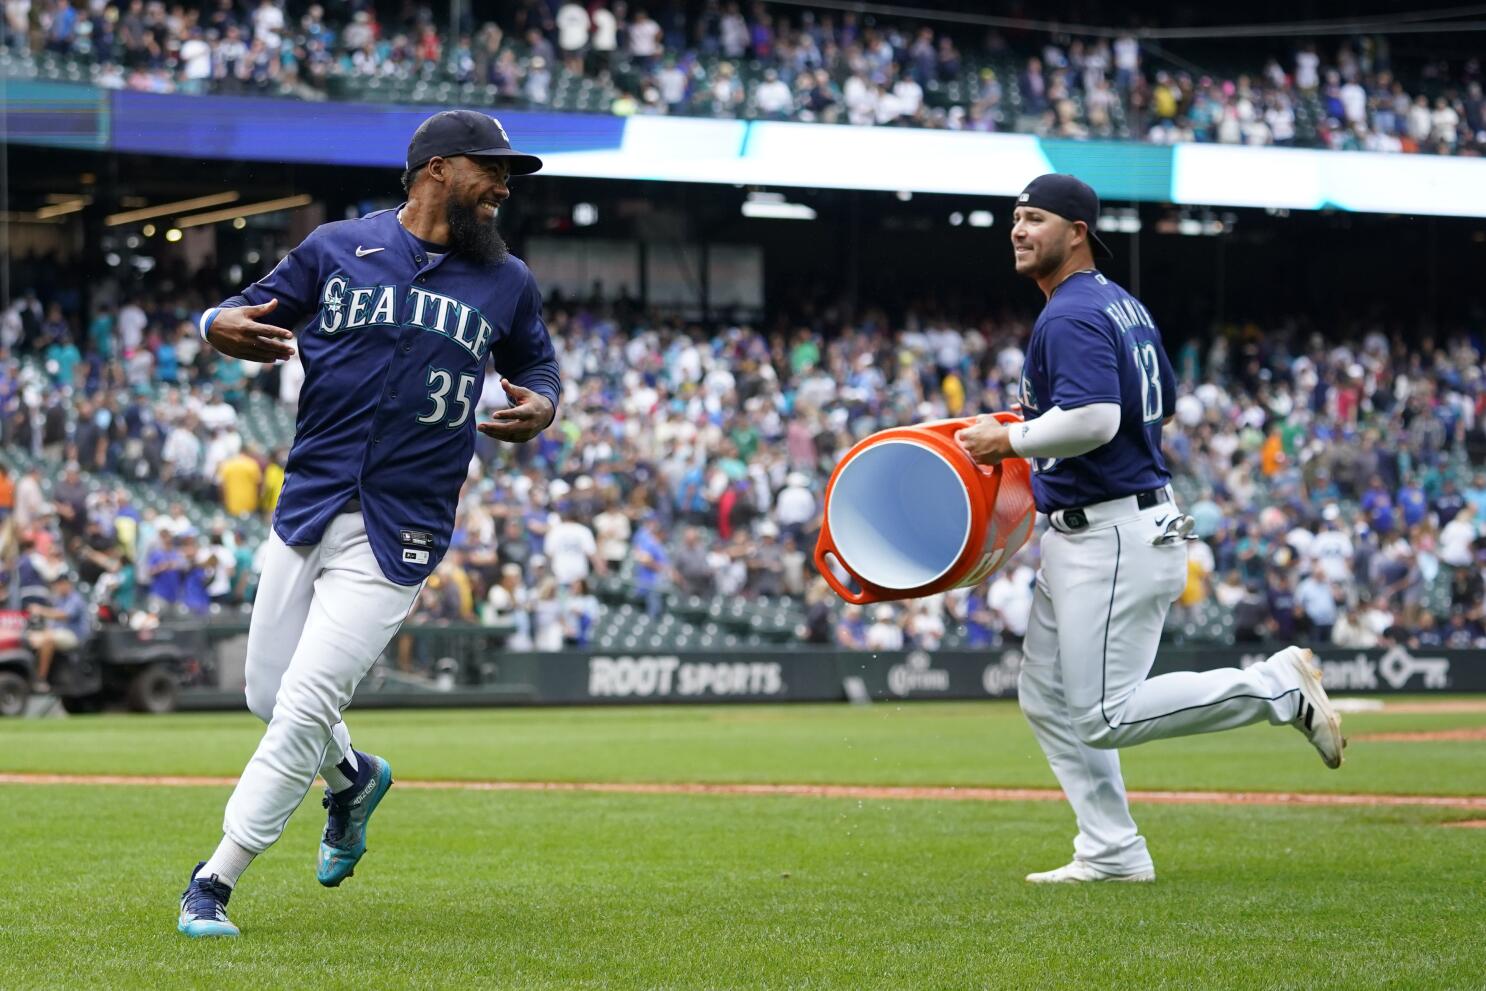 Seattle Mariners' Teoscar Hernandez Makes a Trade with Some Young